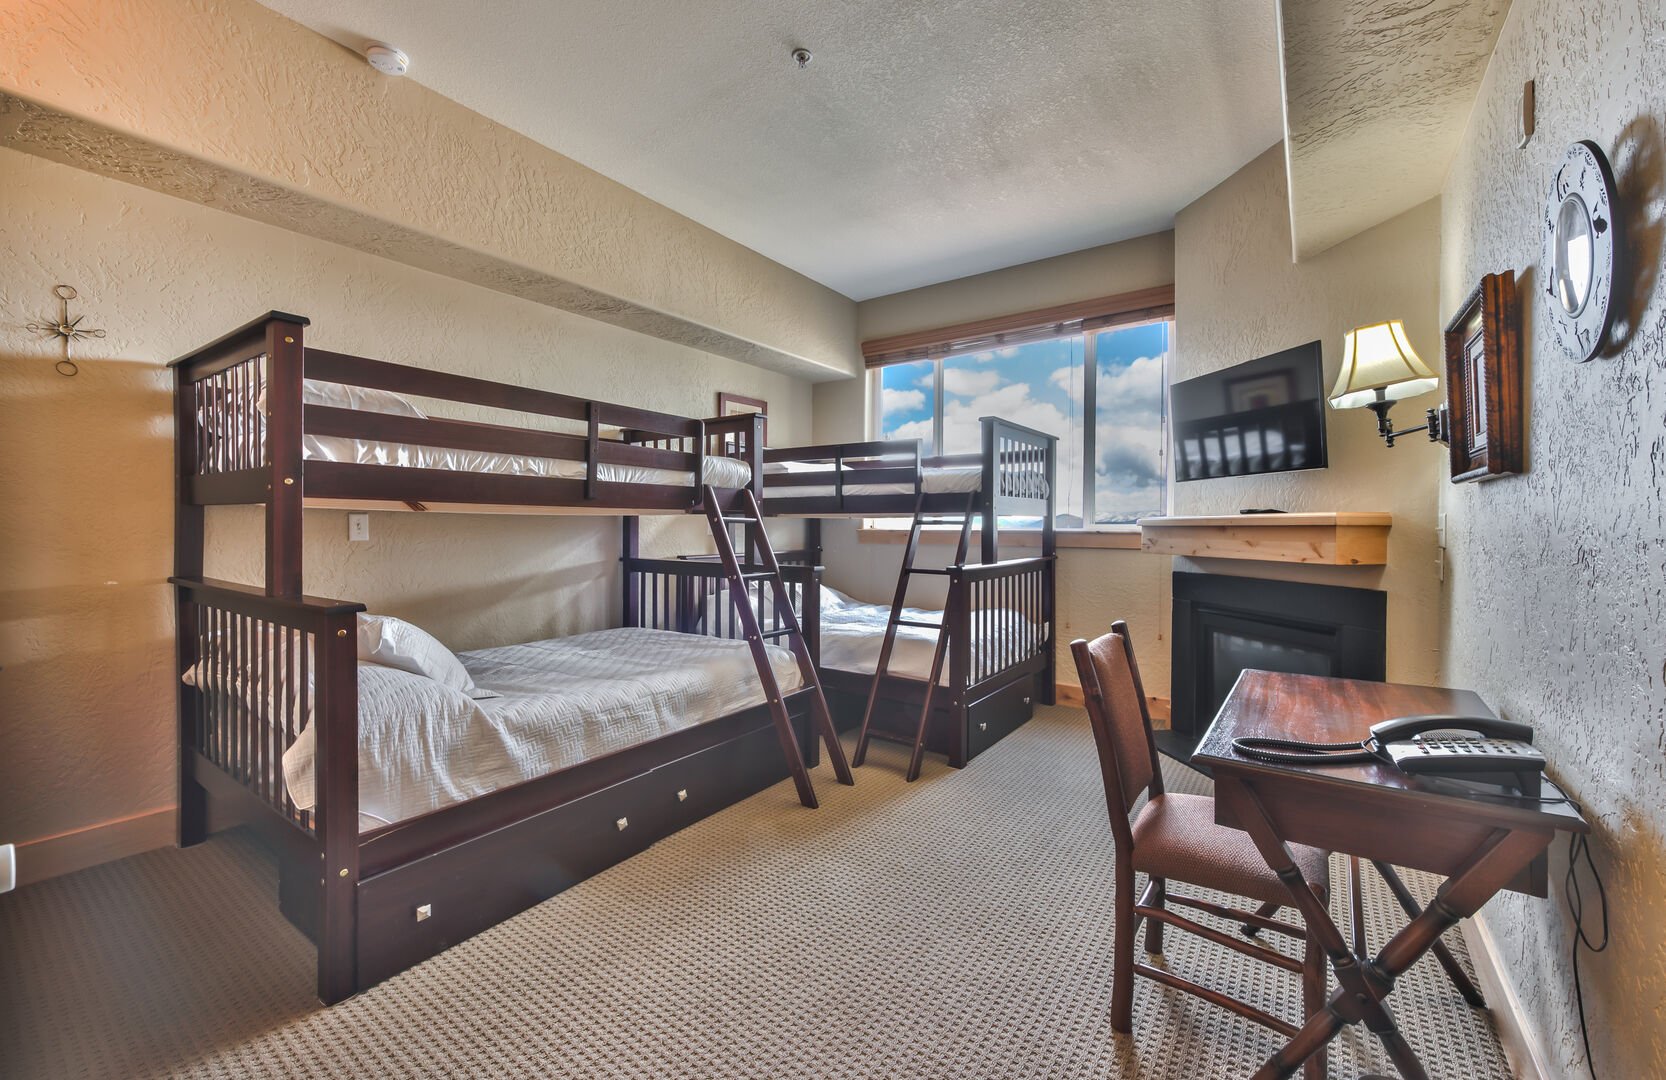 Bedroom with two bunks (2 twins and 2 full beds)